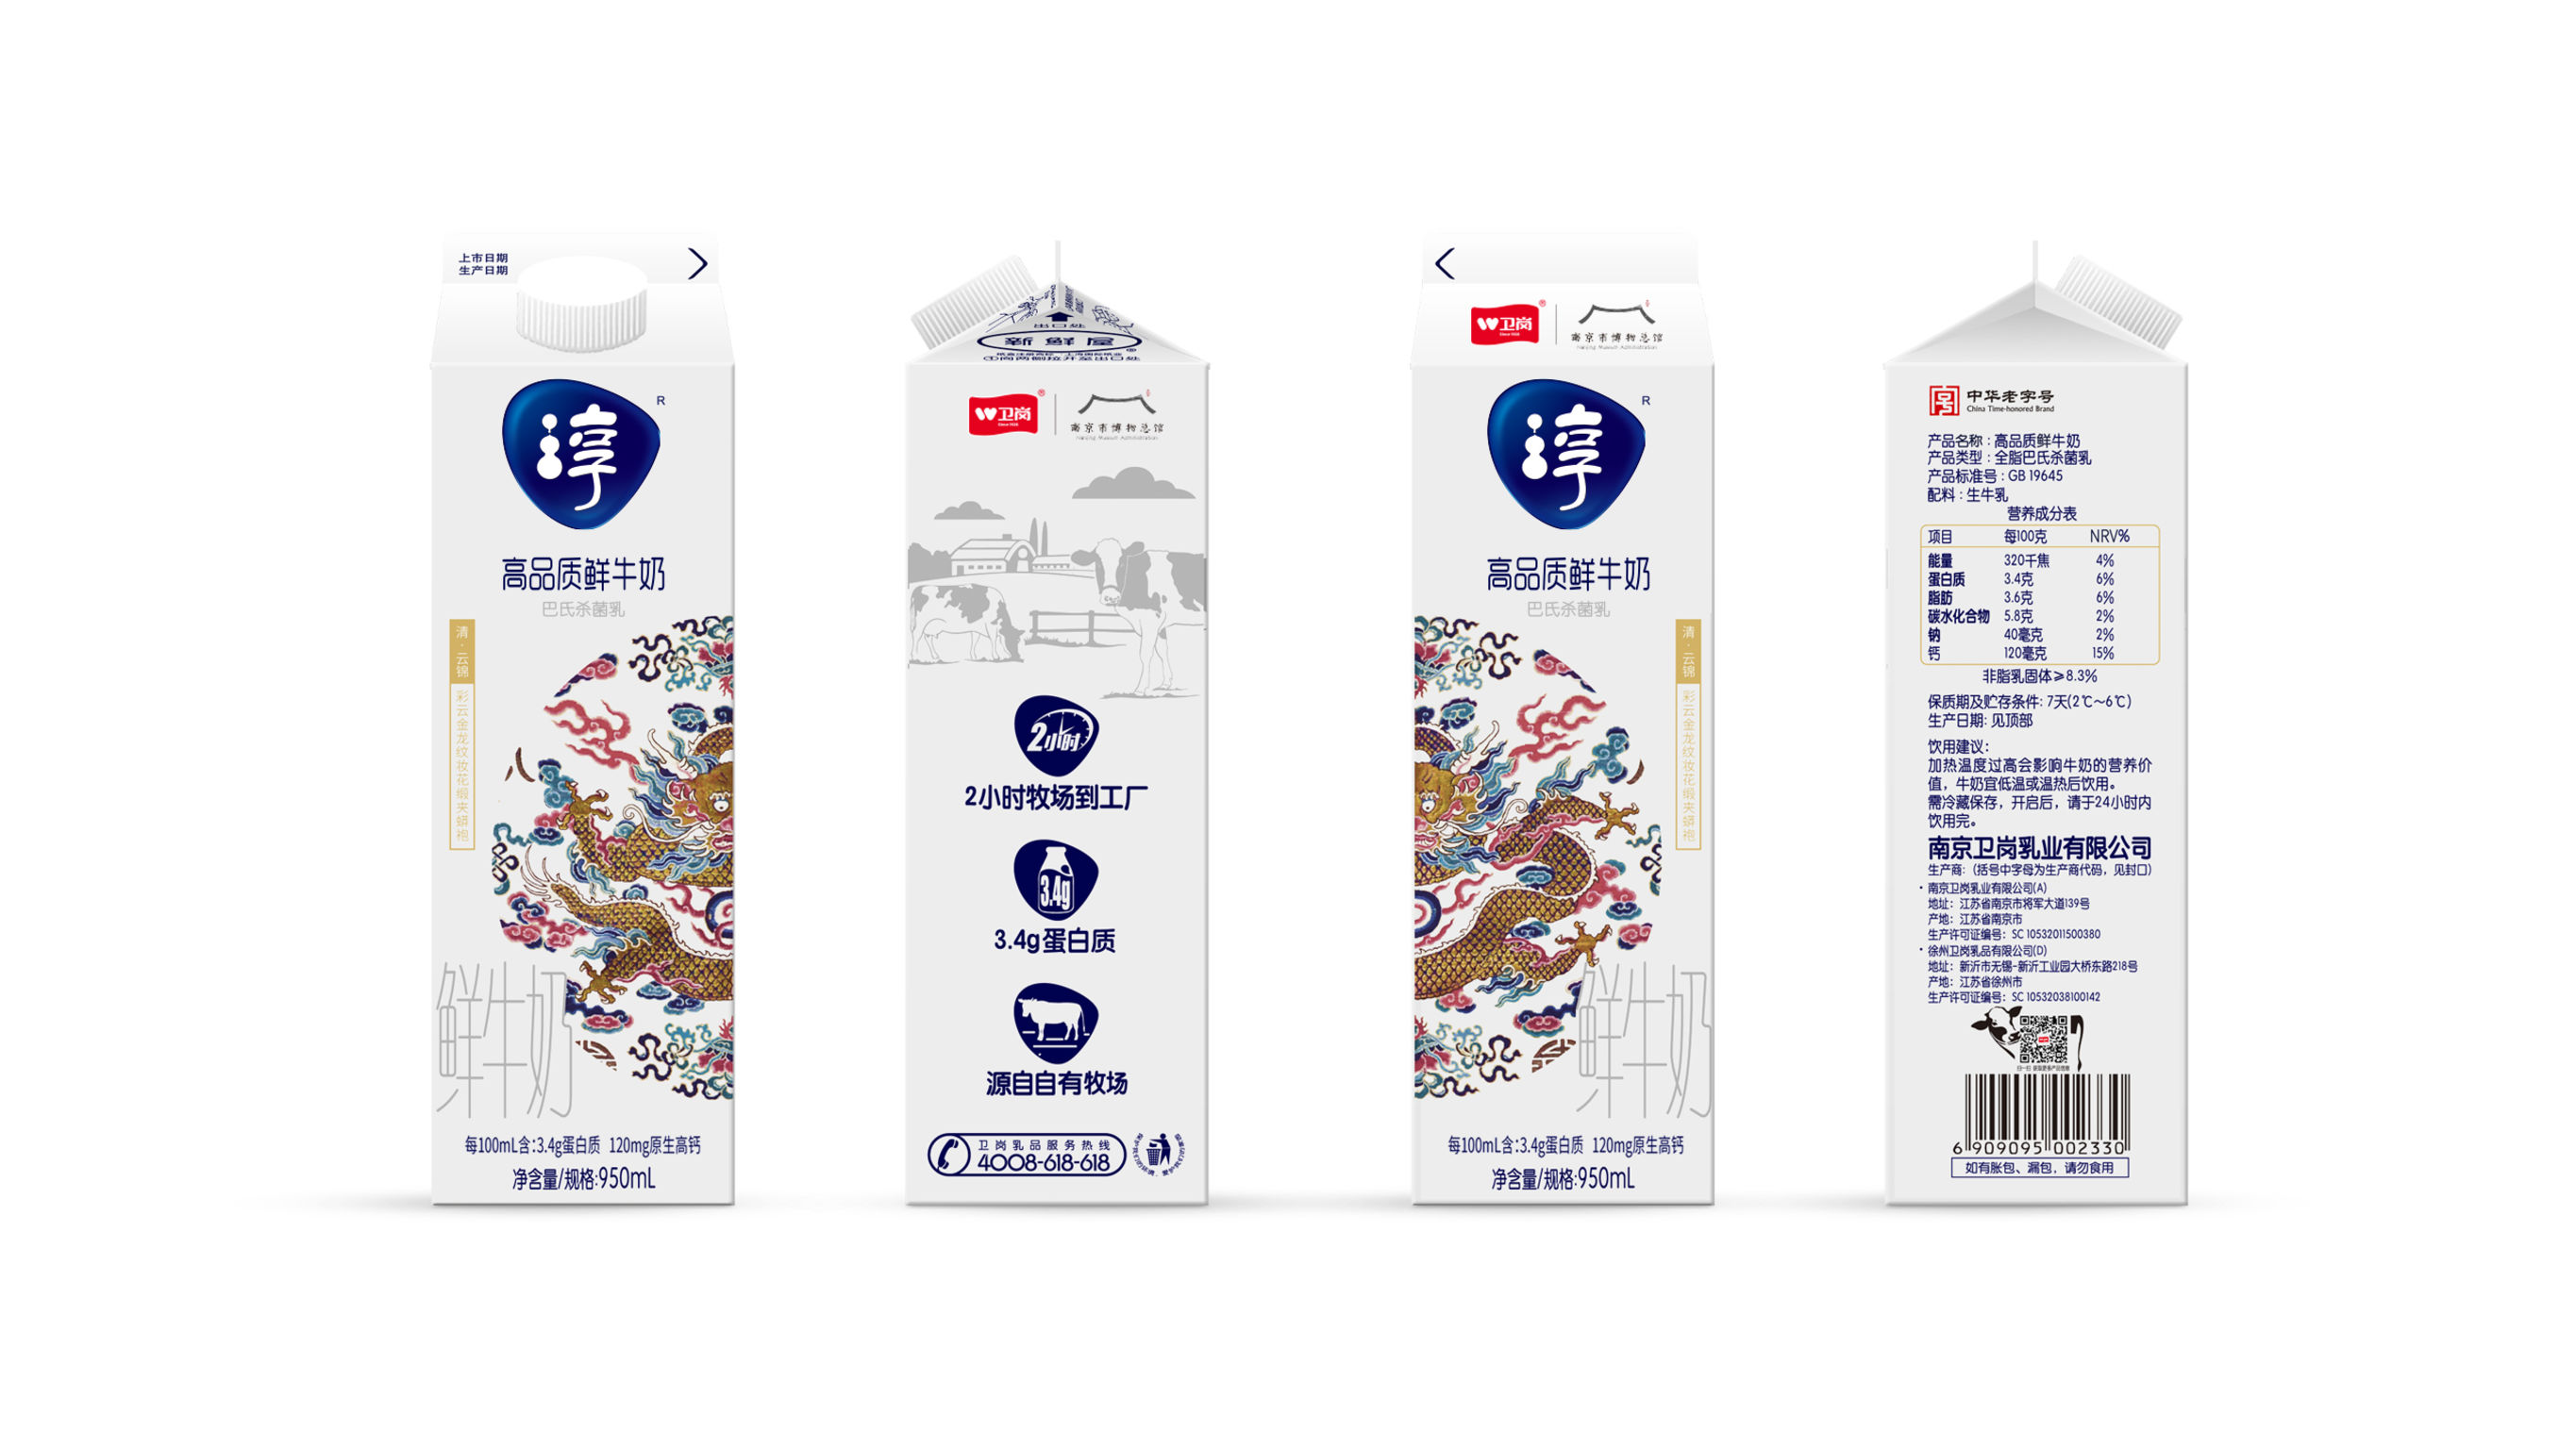 Milk Packaging Design with the Mang-Dragon